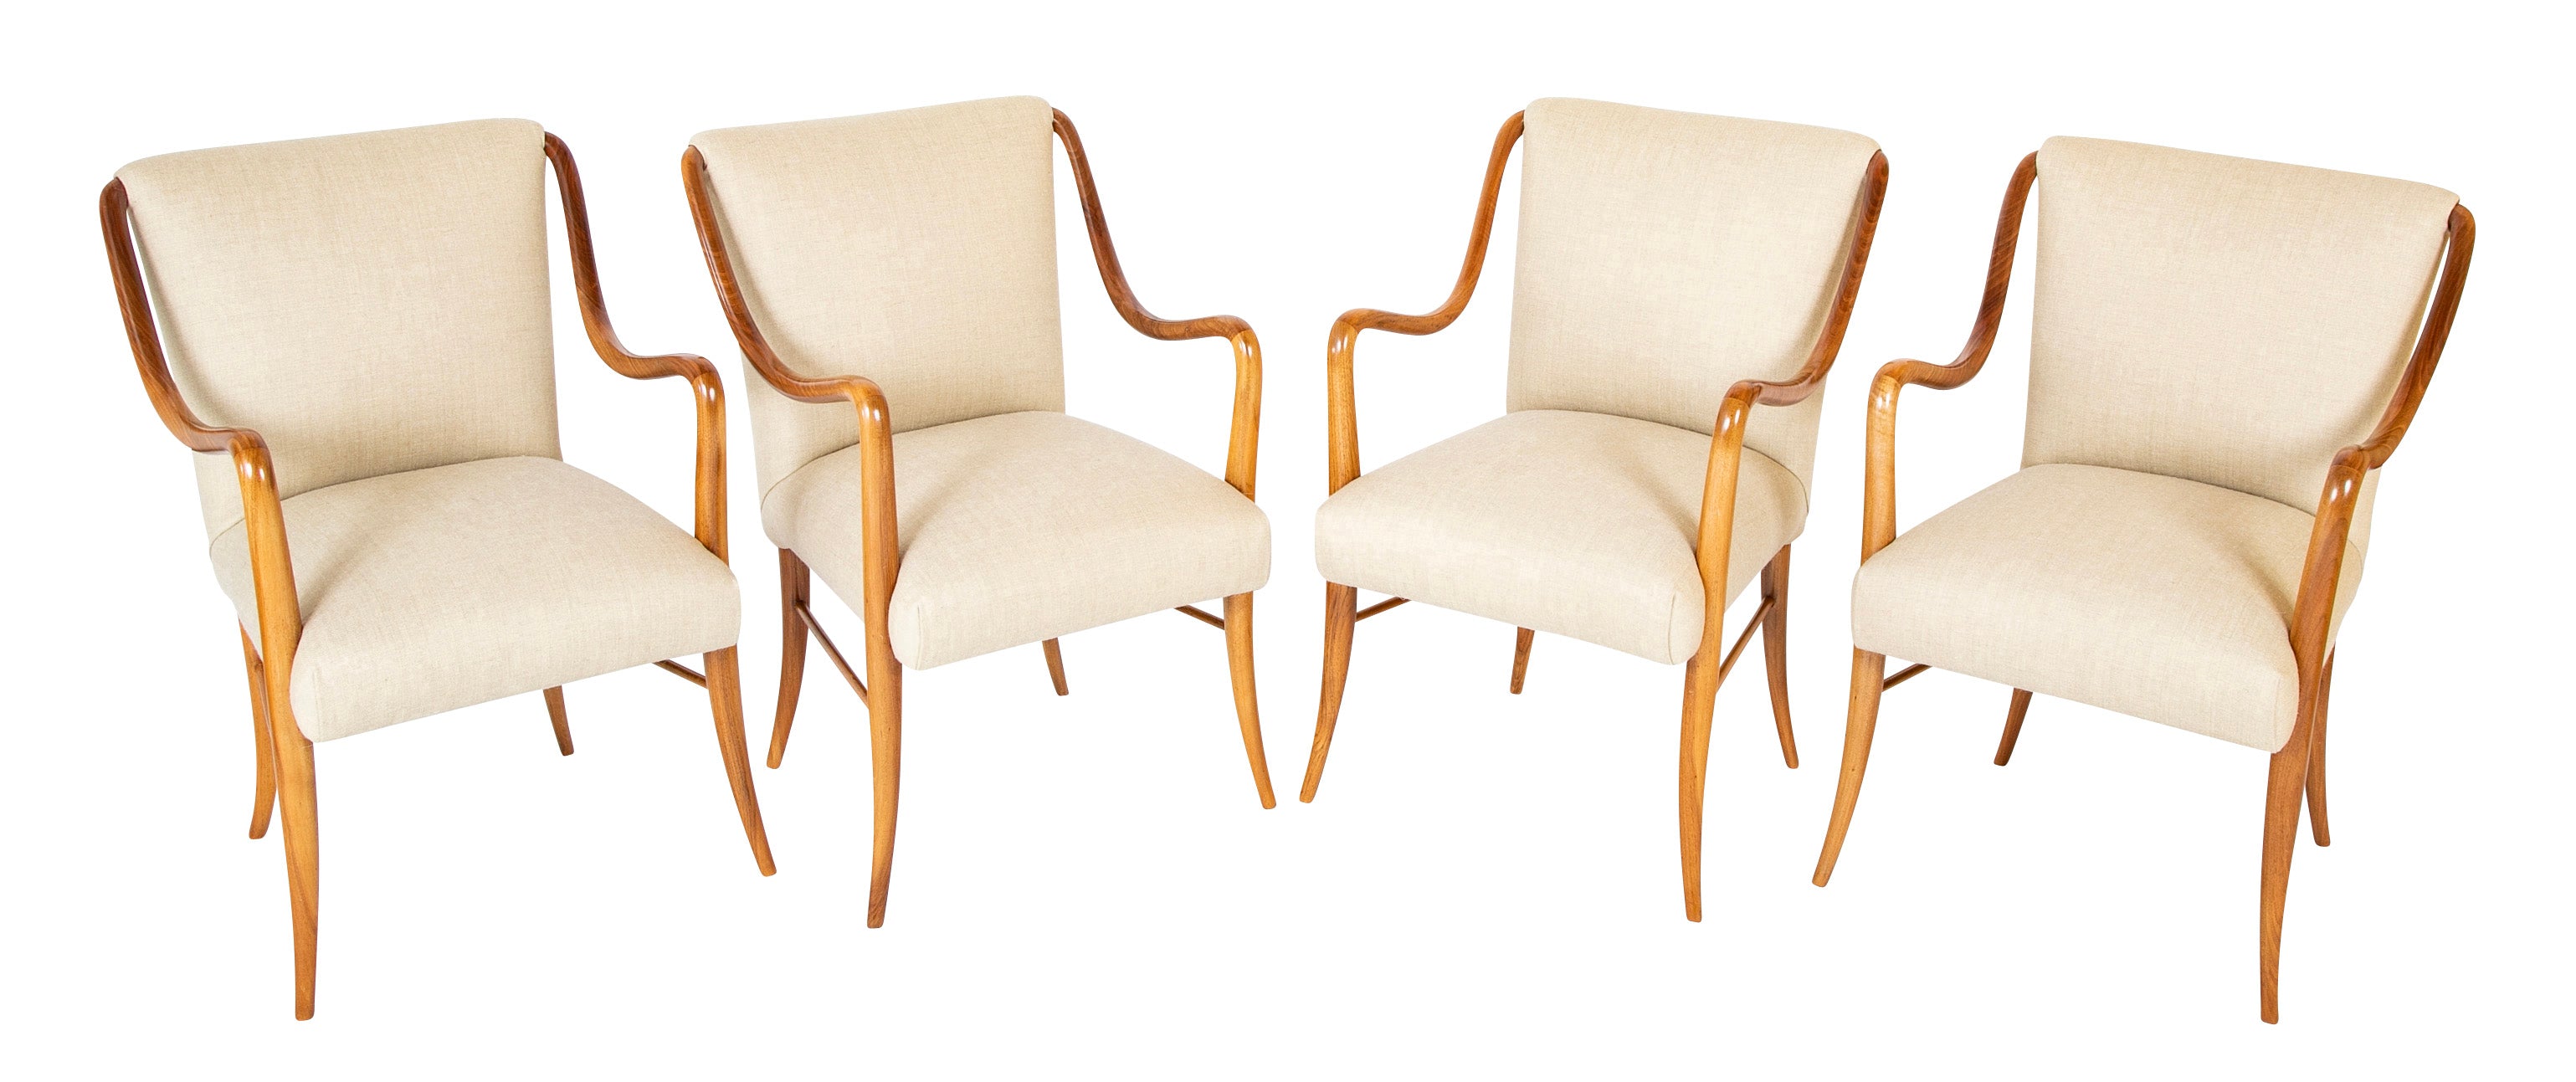 Set of Four Mid-Century Armchairs in Wood by Italian Designer Paolo Buffa